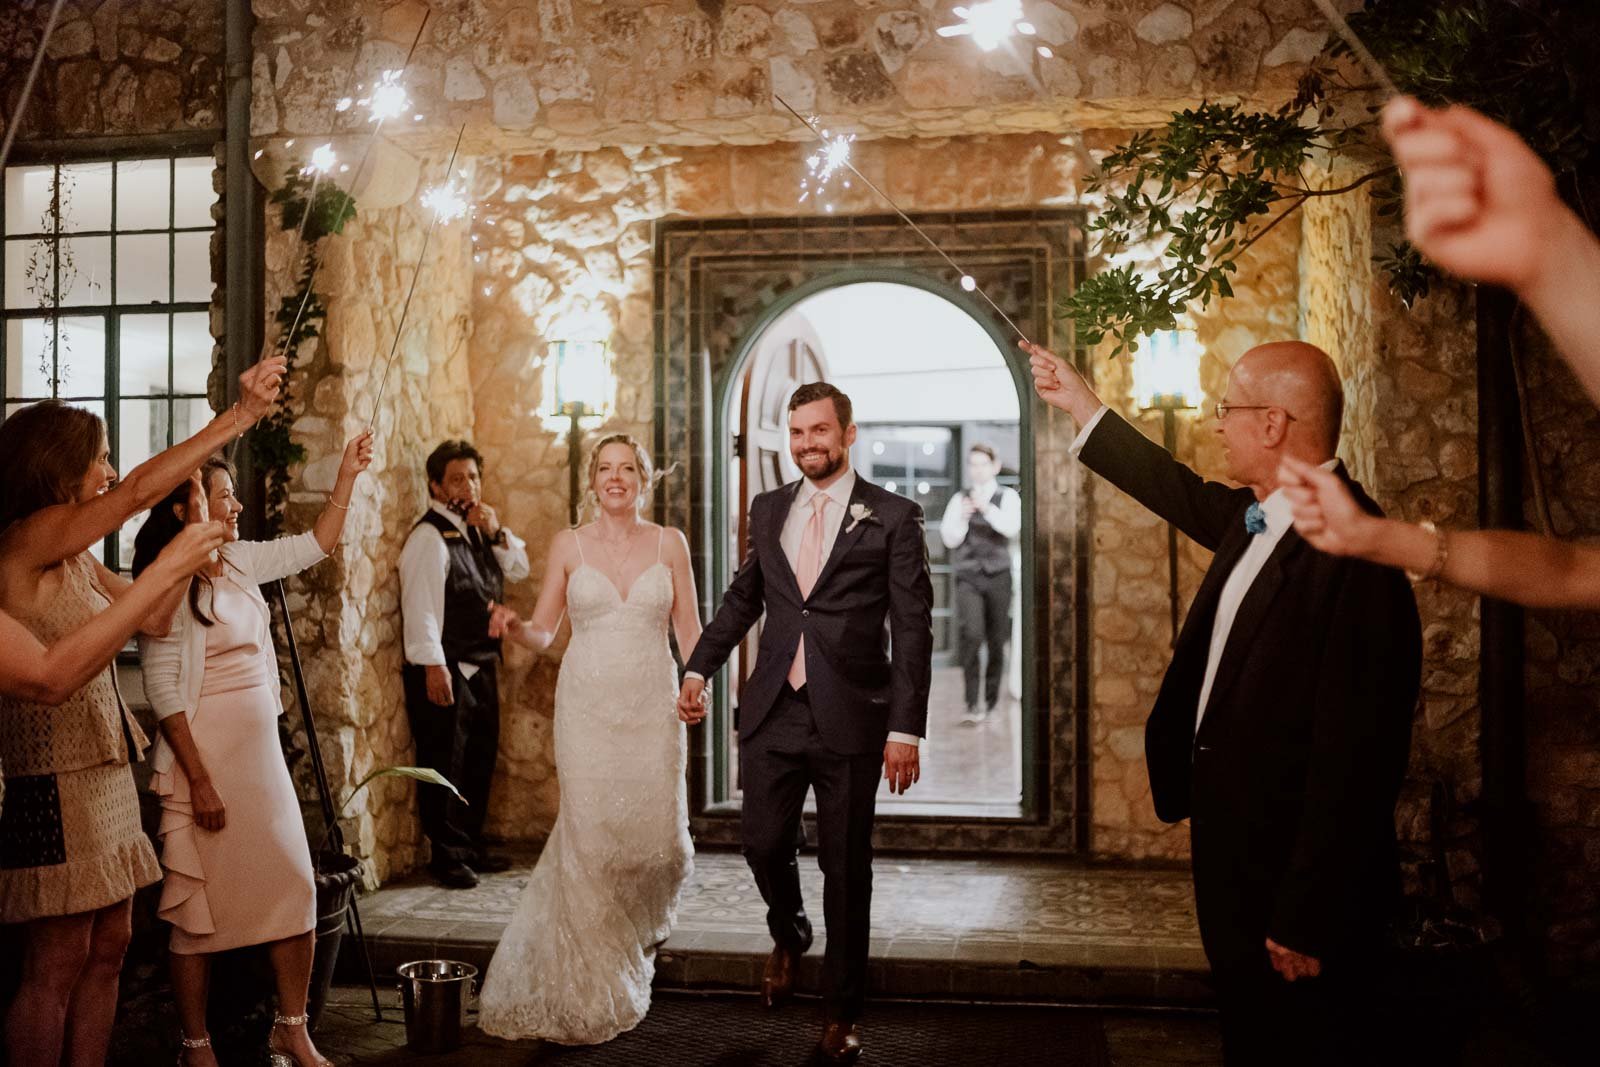 The couple depart the veranda as guests light up sparklers